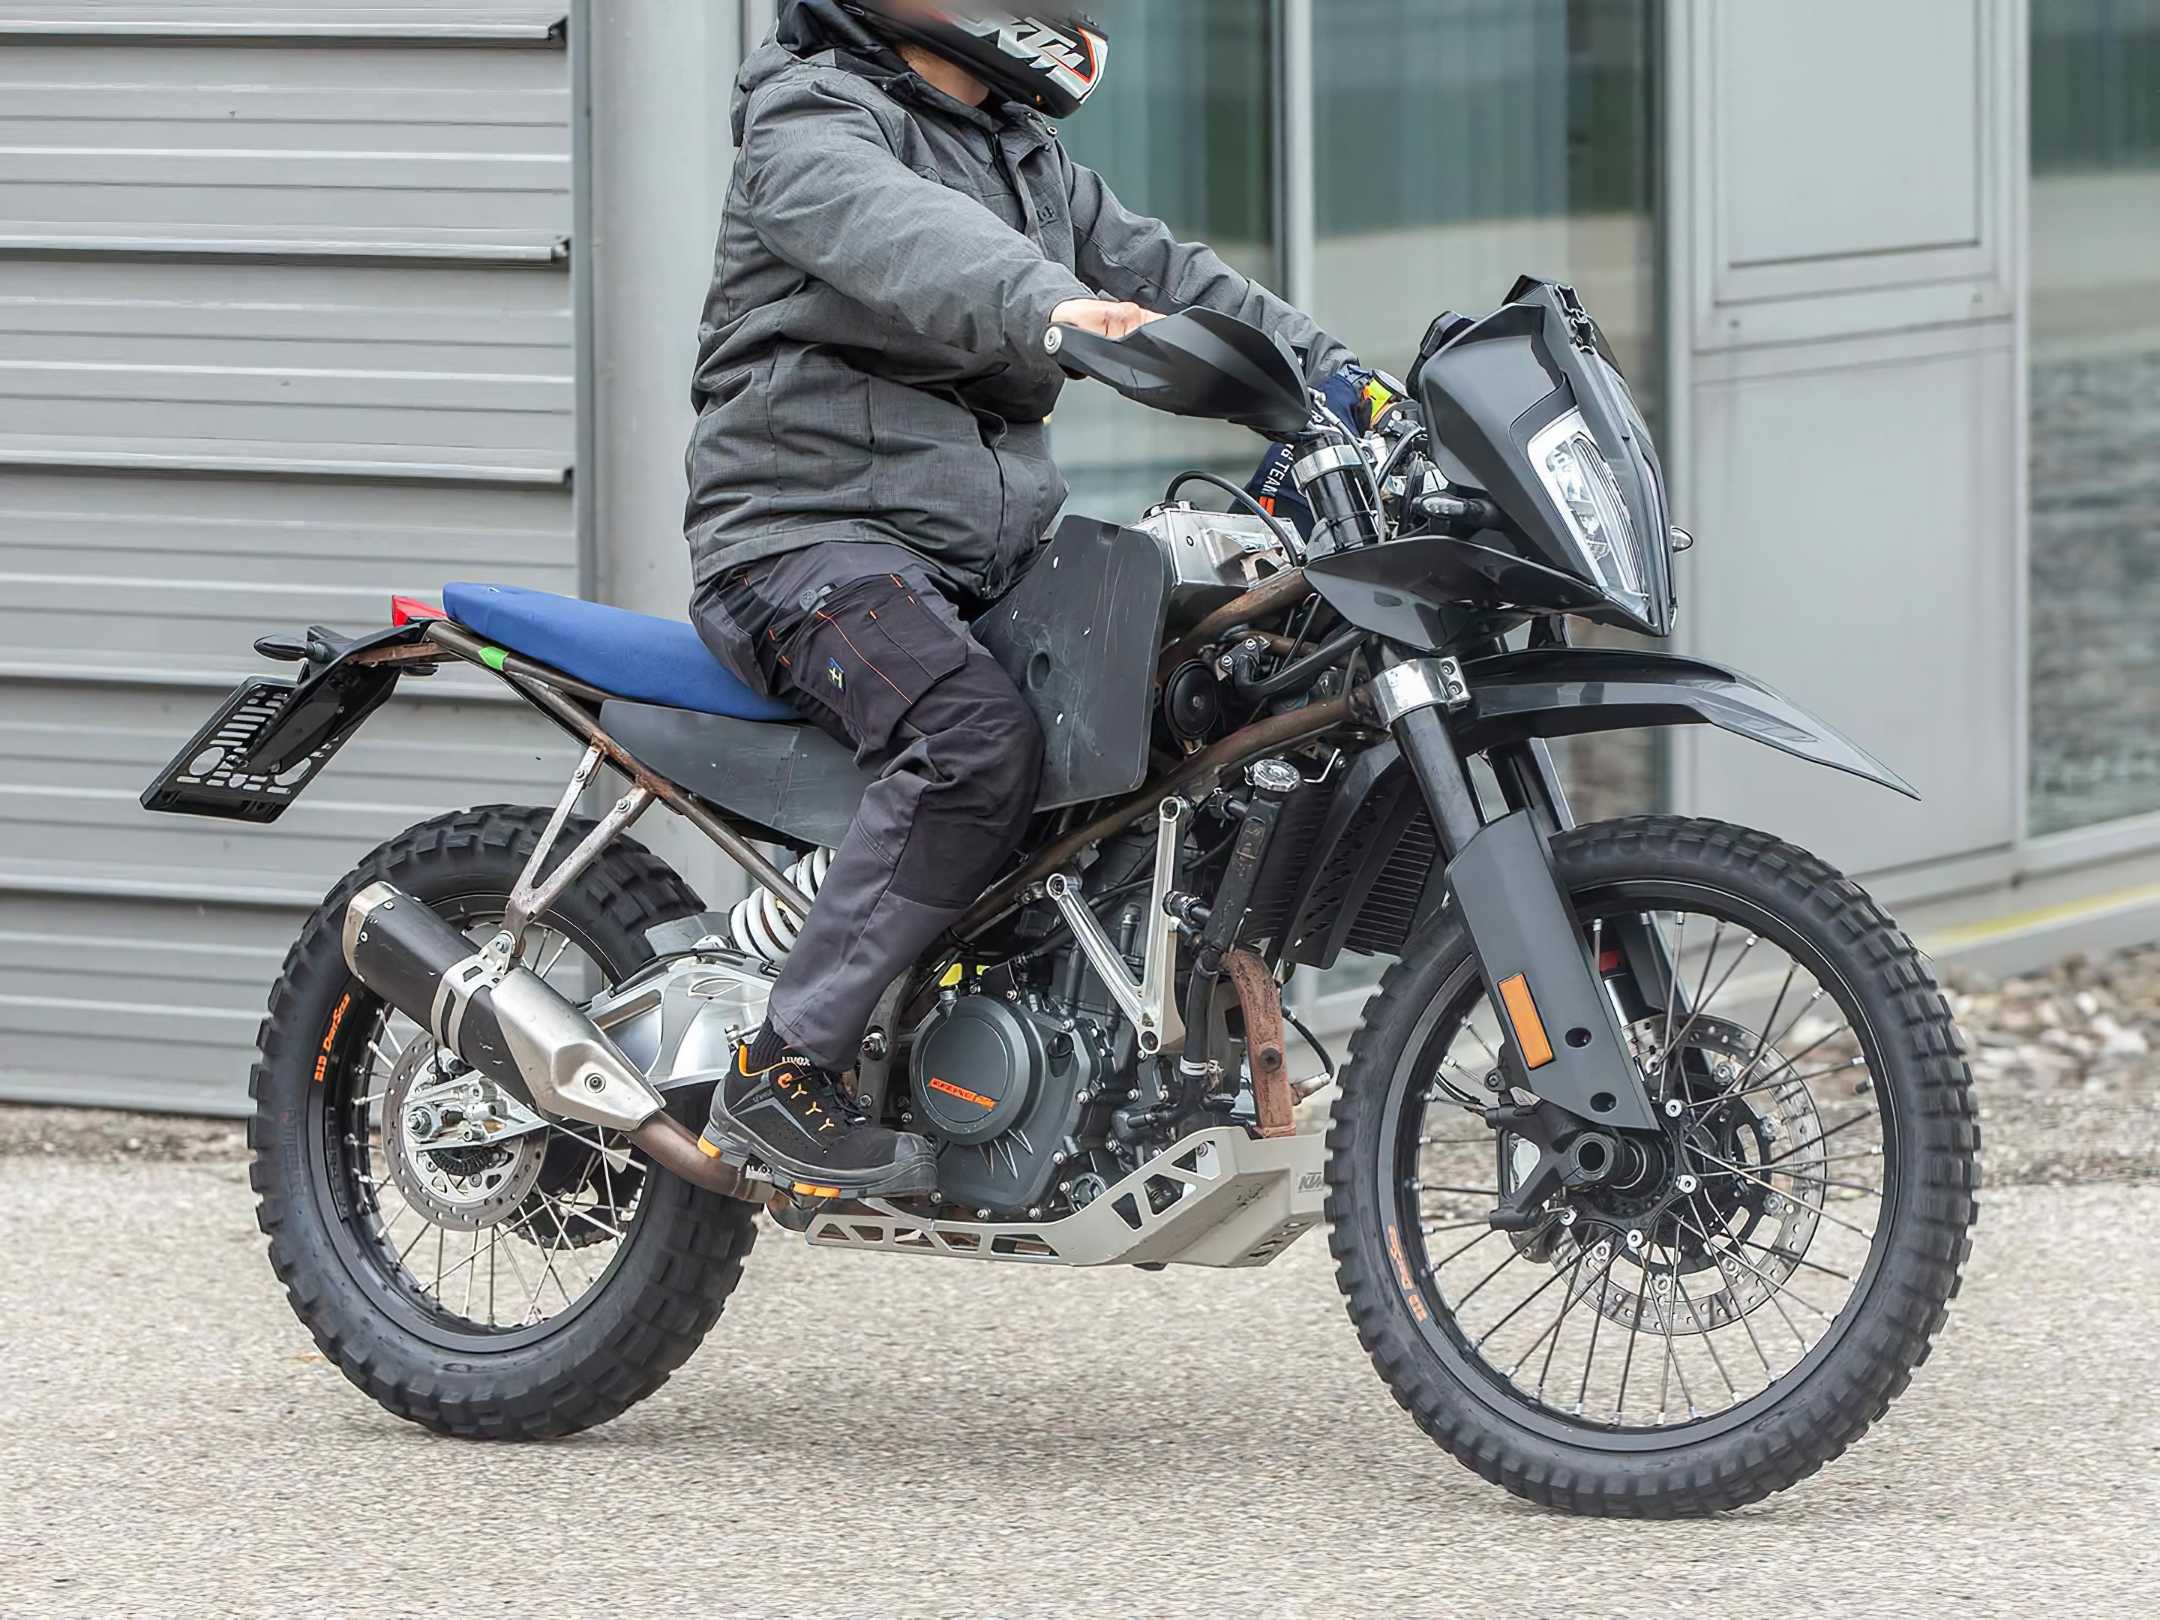 KTM 390 Adventure spotted with more off-road capability
- also in the MOTORCYCLES.NEWS APP via @motorradnachrichten